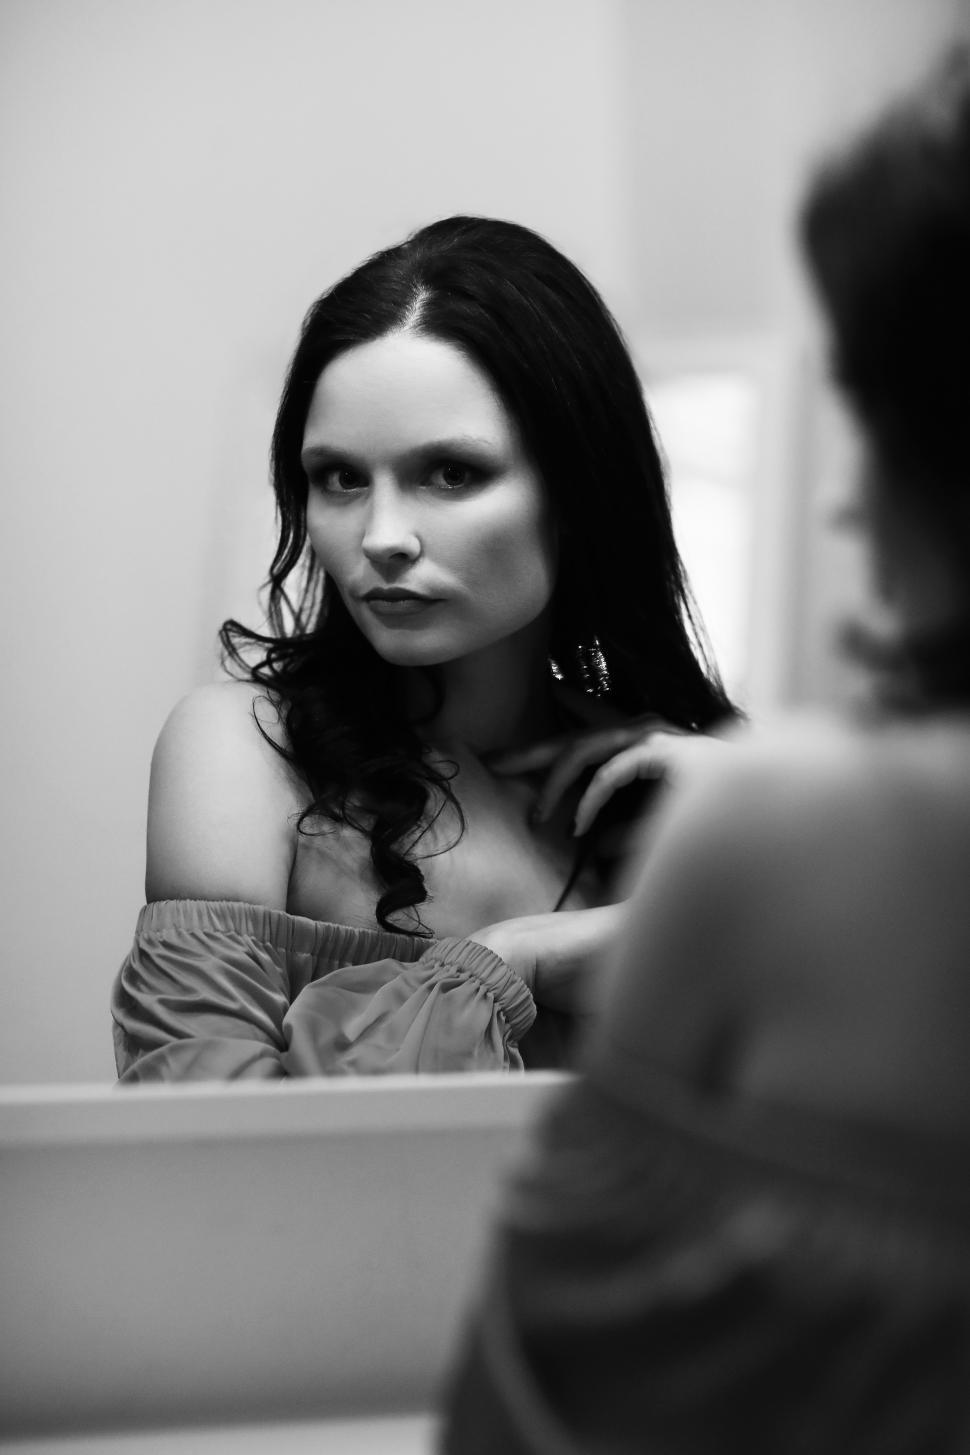 Free Image of Woman and her reflection 